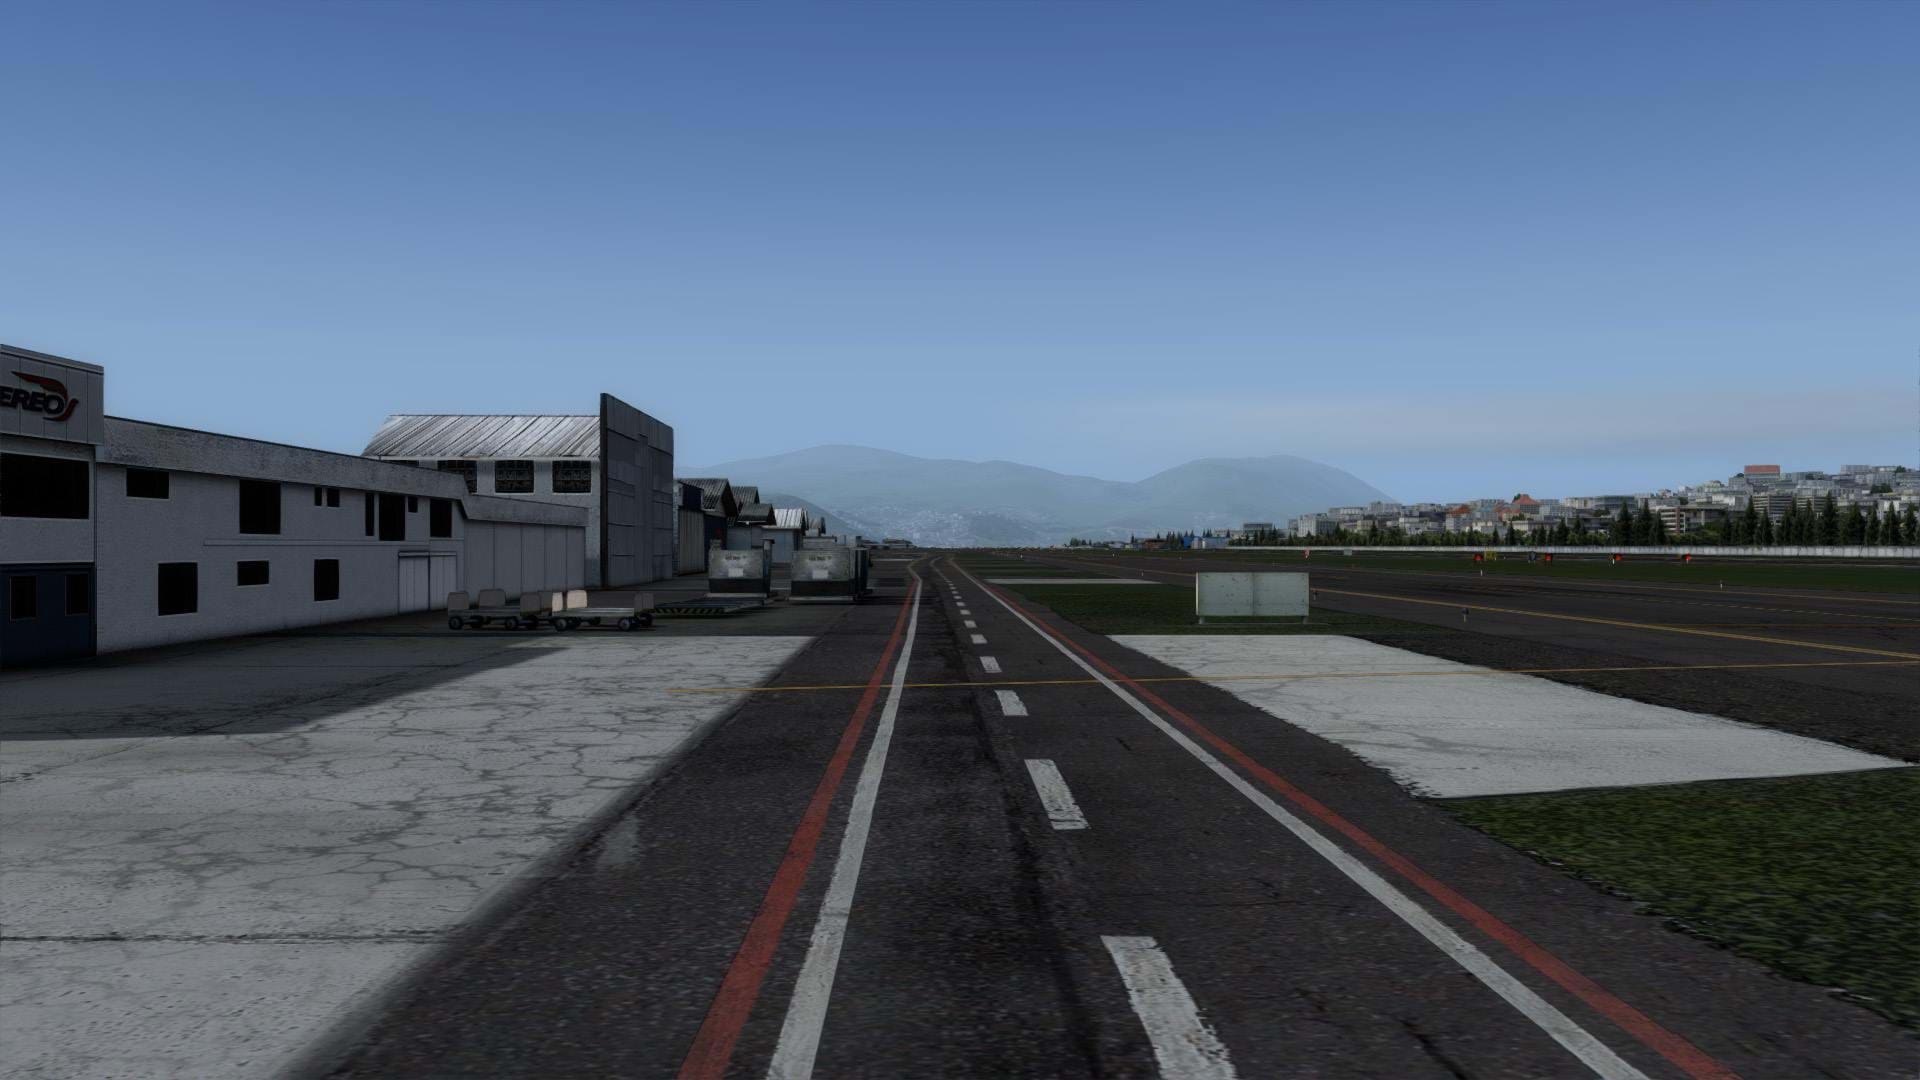 Aerosoft's Approaching Quito for FSX and Prepar3D